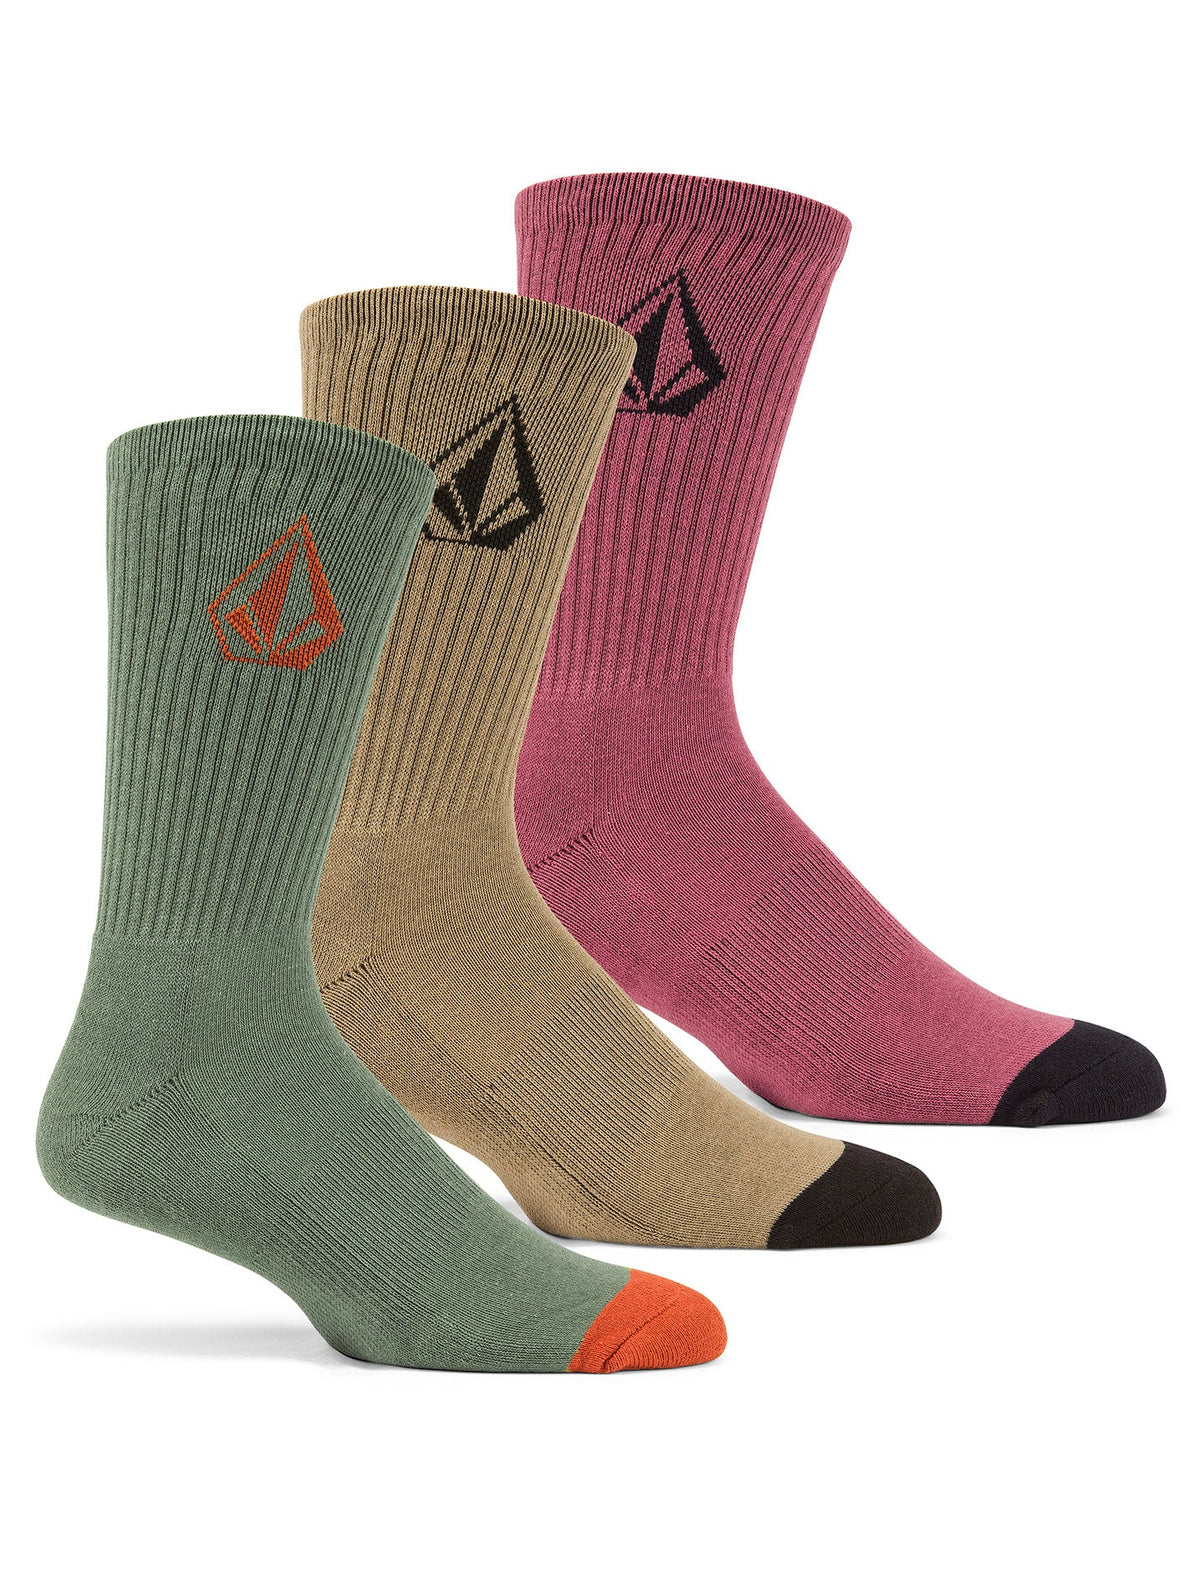 Chaussettes Full Stone (3 paires) - AGAVE